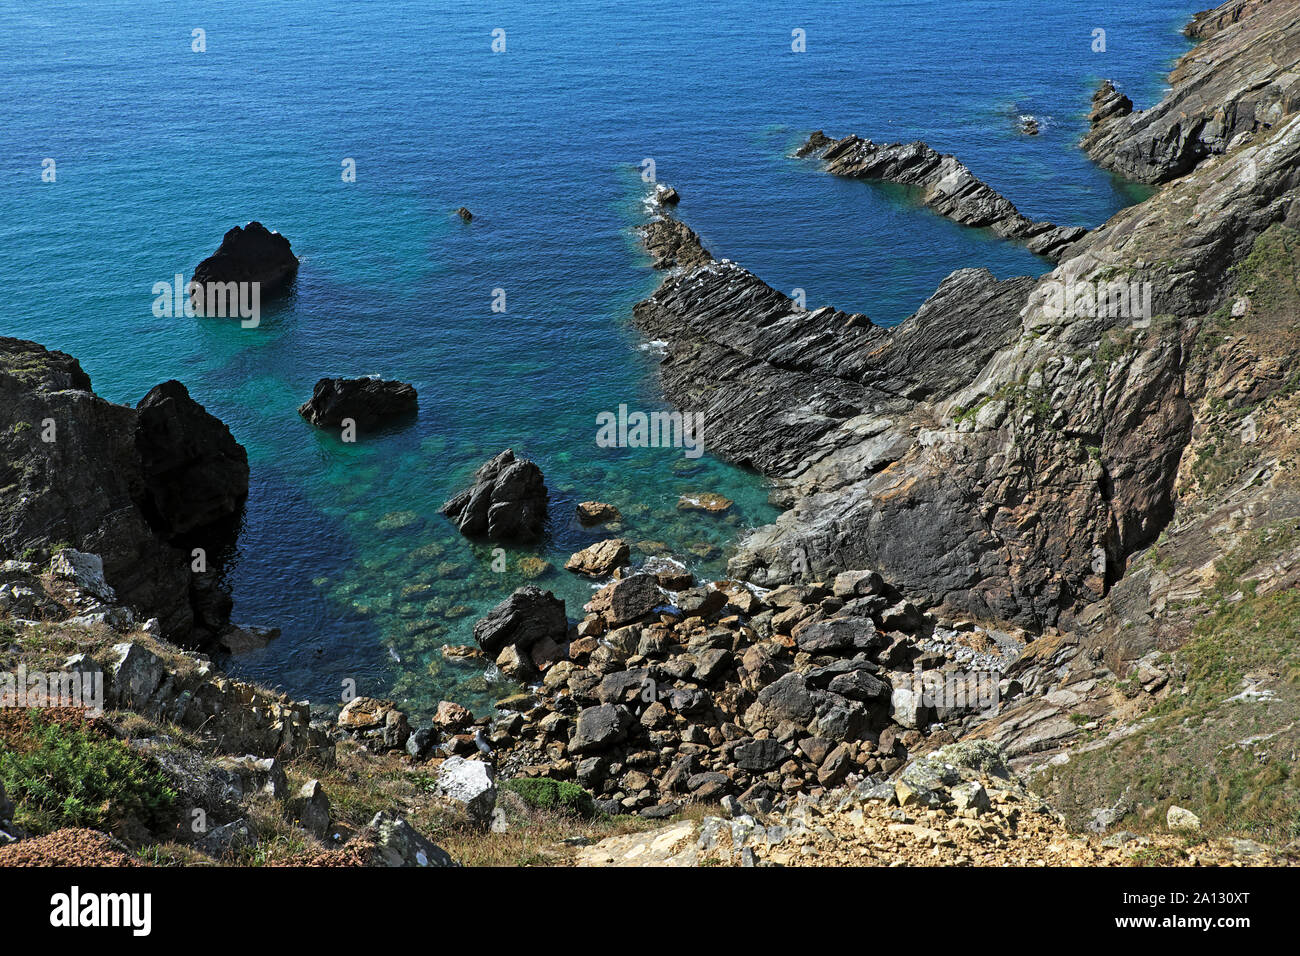 View from Wales Coast Path near Martin's Haven looking down at white seabirds on rocks and rocky shore Pembrokeshire Wales UK  KATHY DEWITT Stock Photo